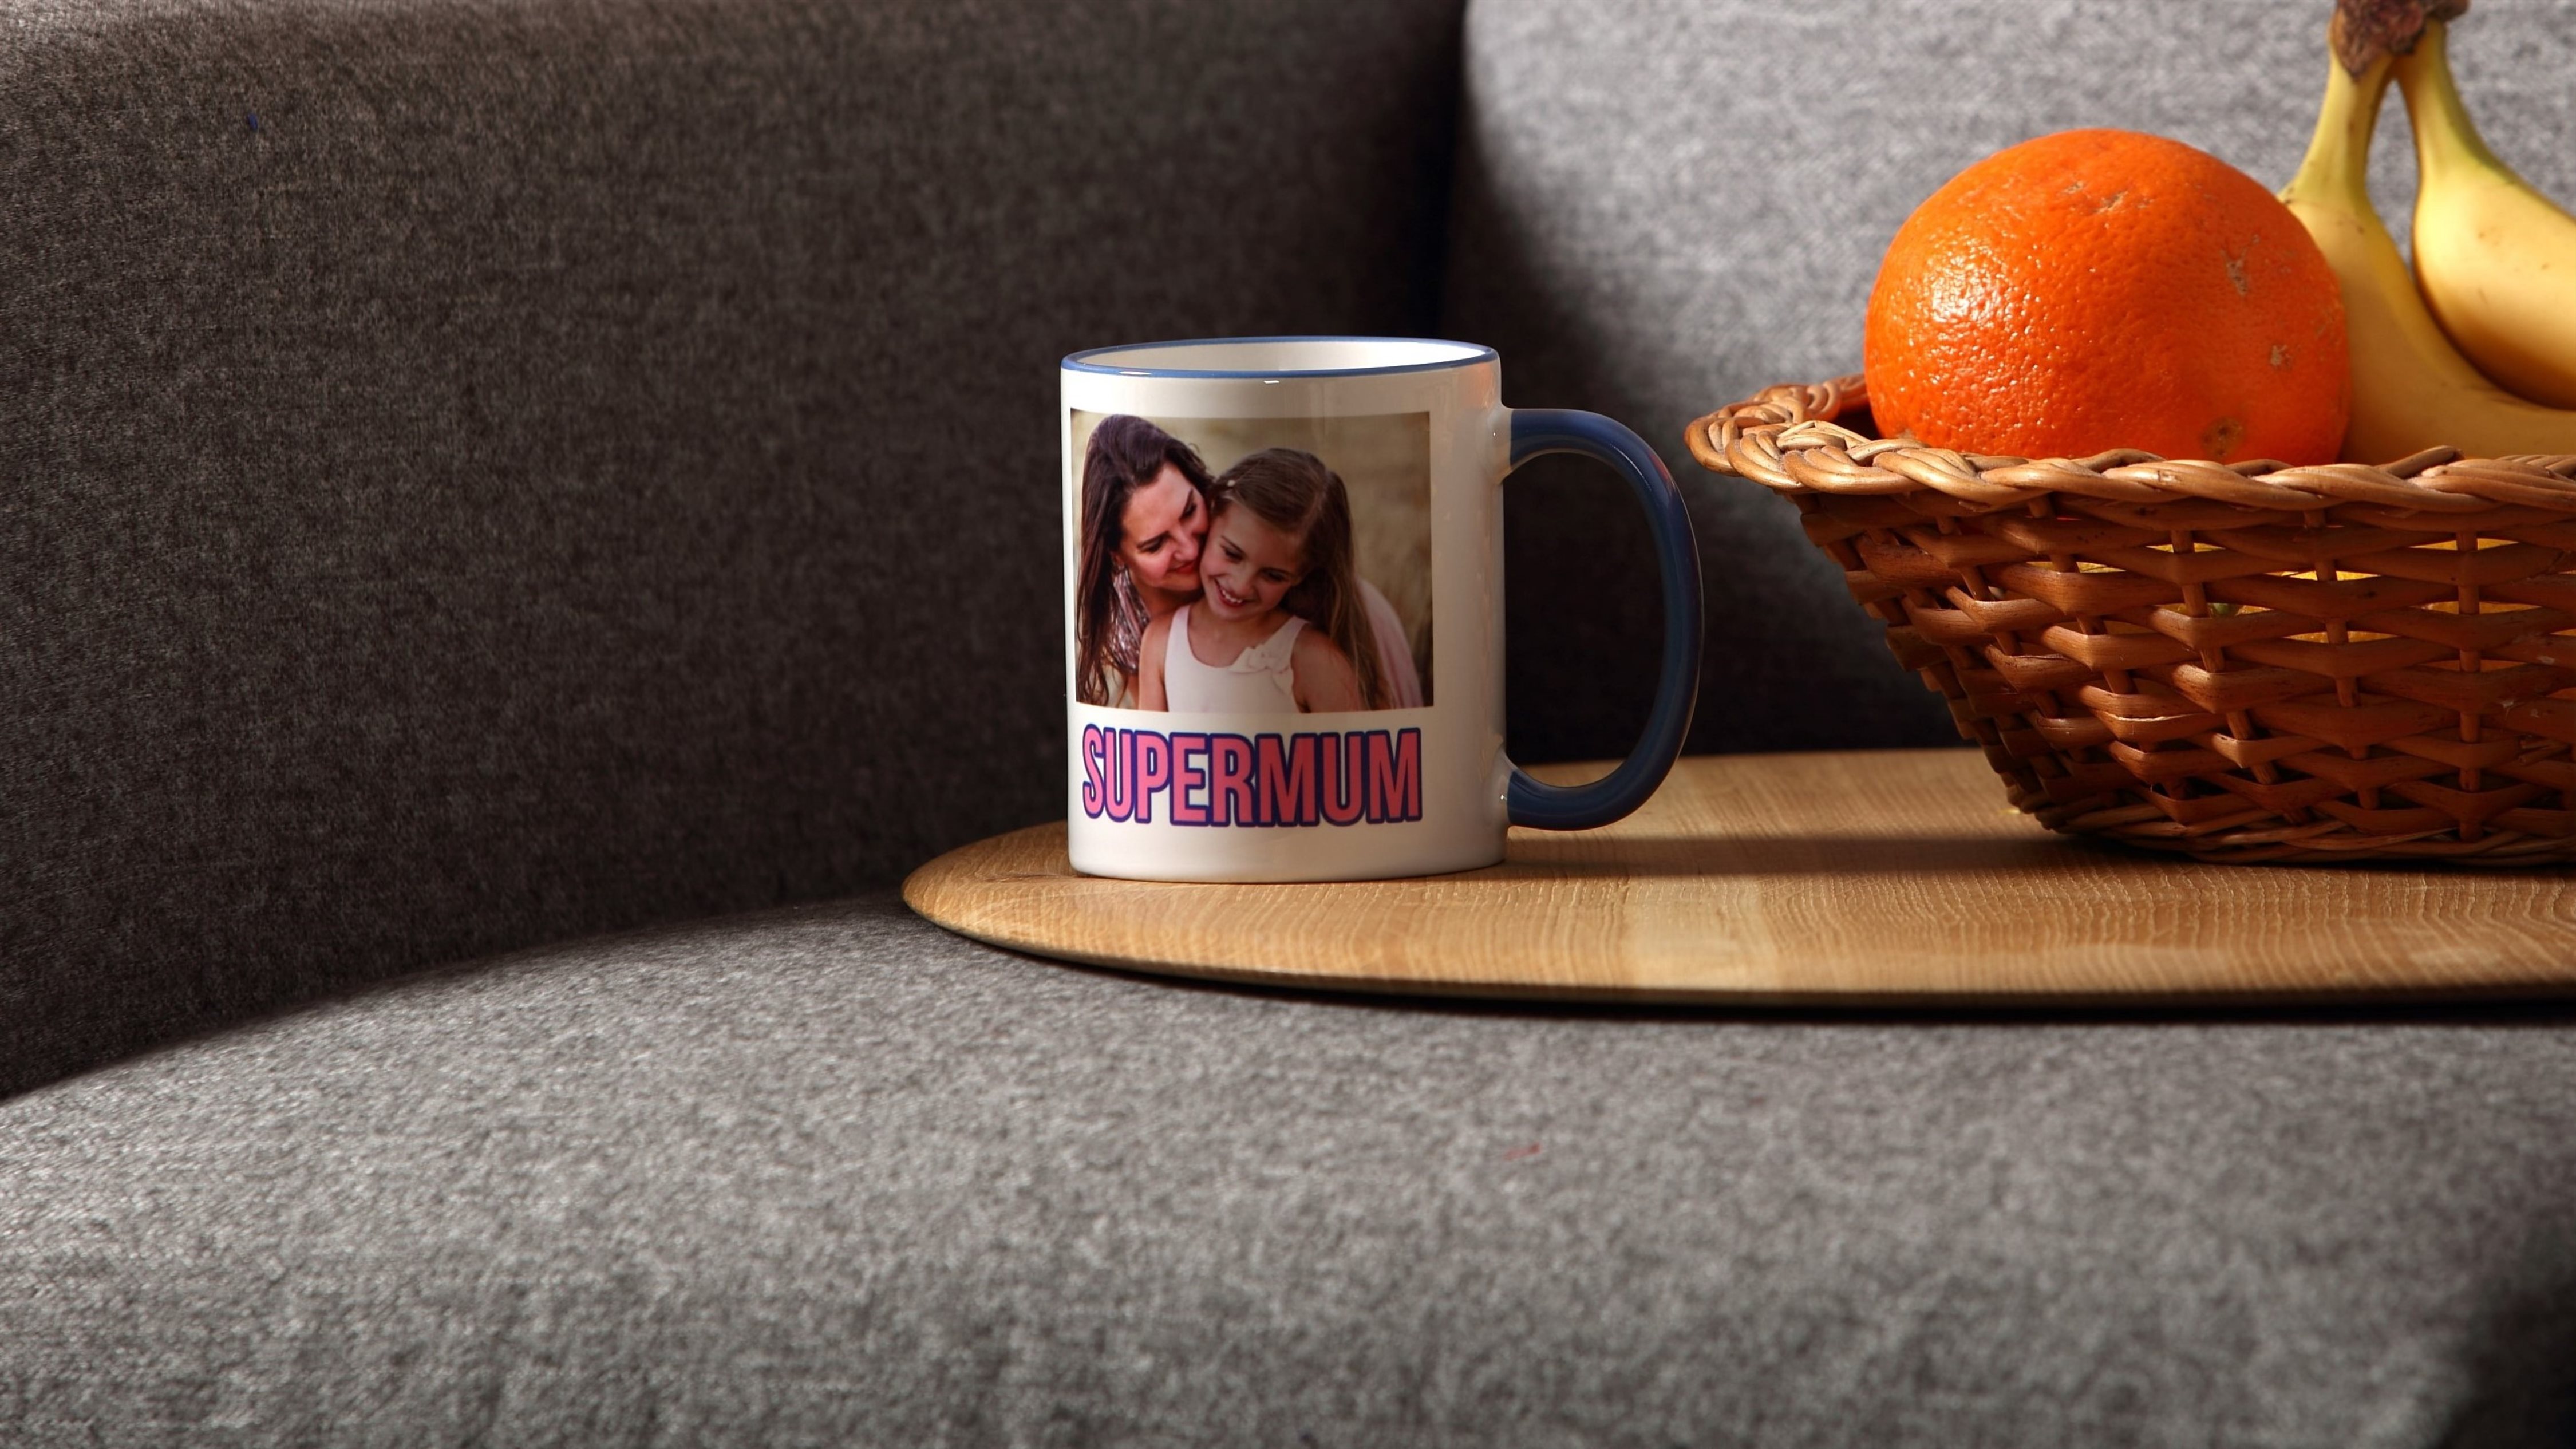 what-to-give-our-precious-mums-on-mothers-day-our-tip-is-a-design-your-own-mug-which-is-special-as-its-personalised